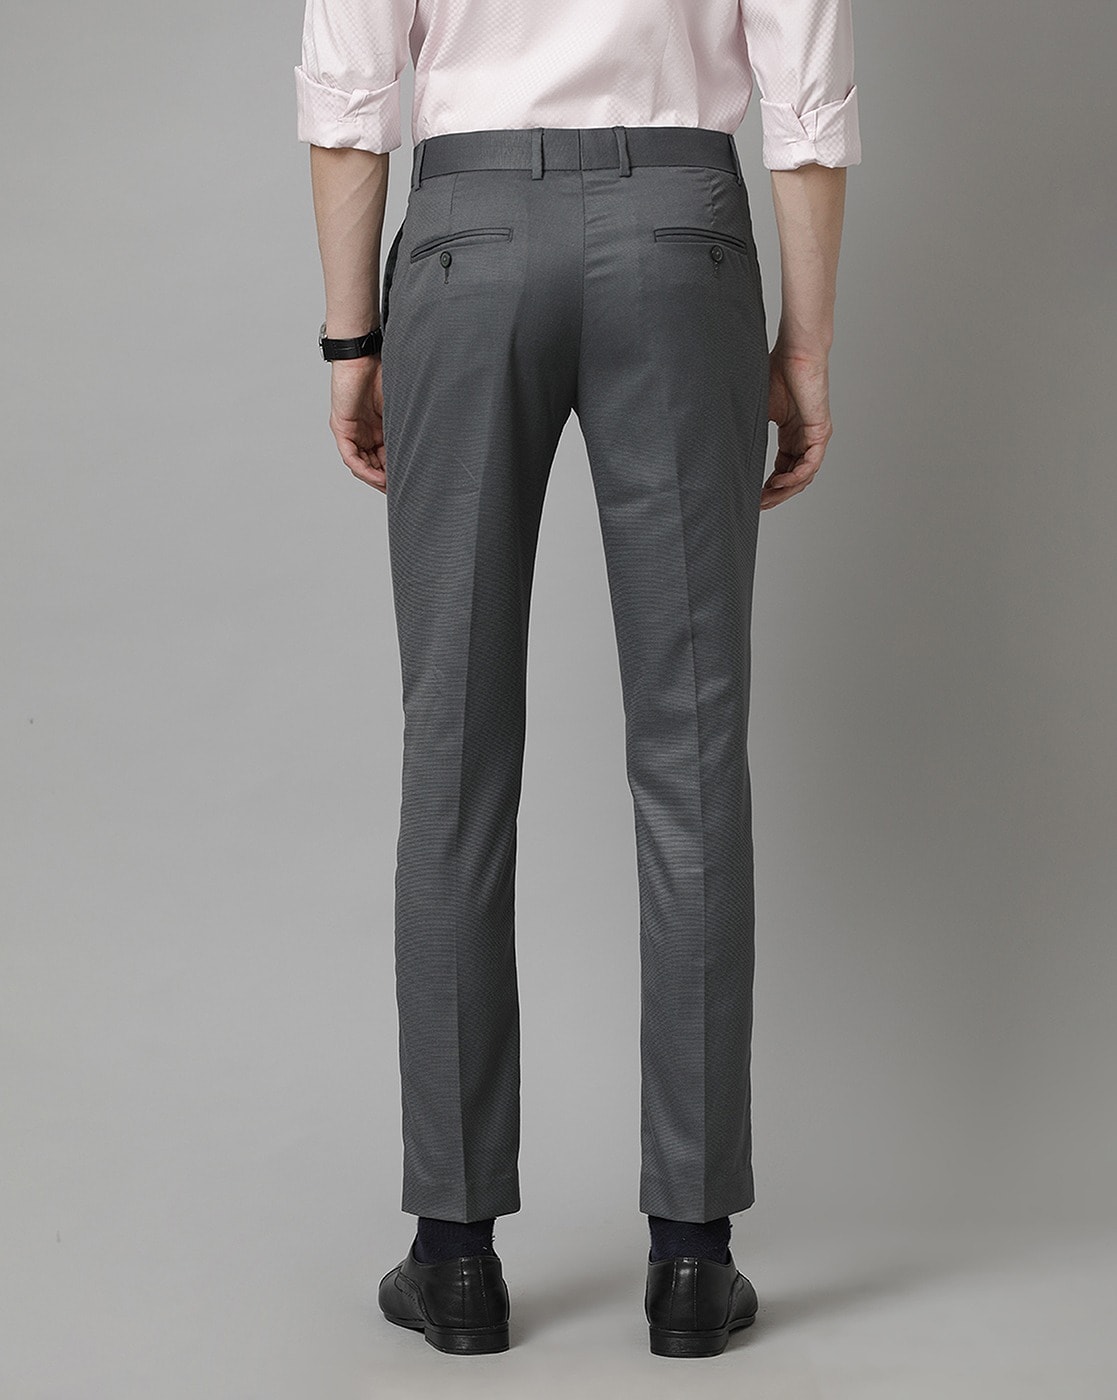 Buy khaki Trousers & Pants for Men by INDEPENDENCE Online | Ajio.com